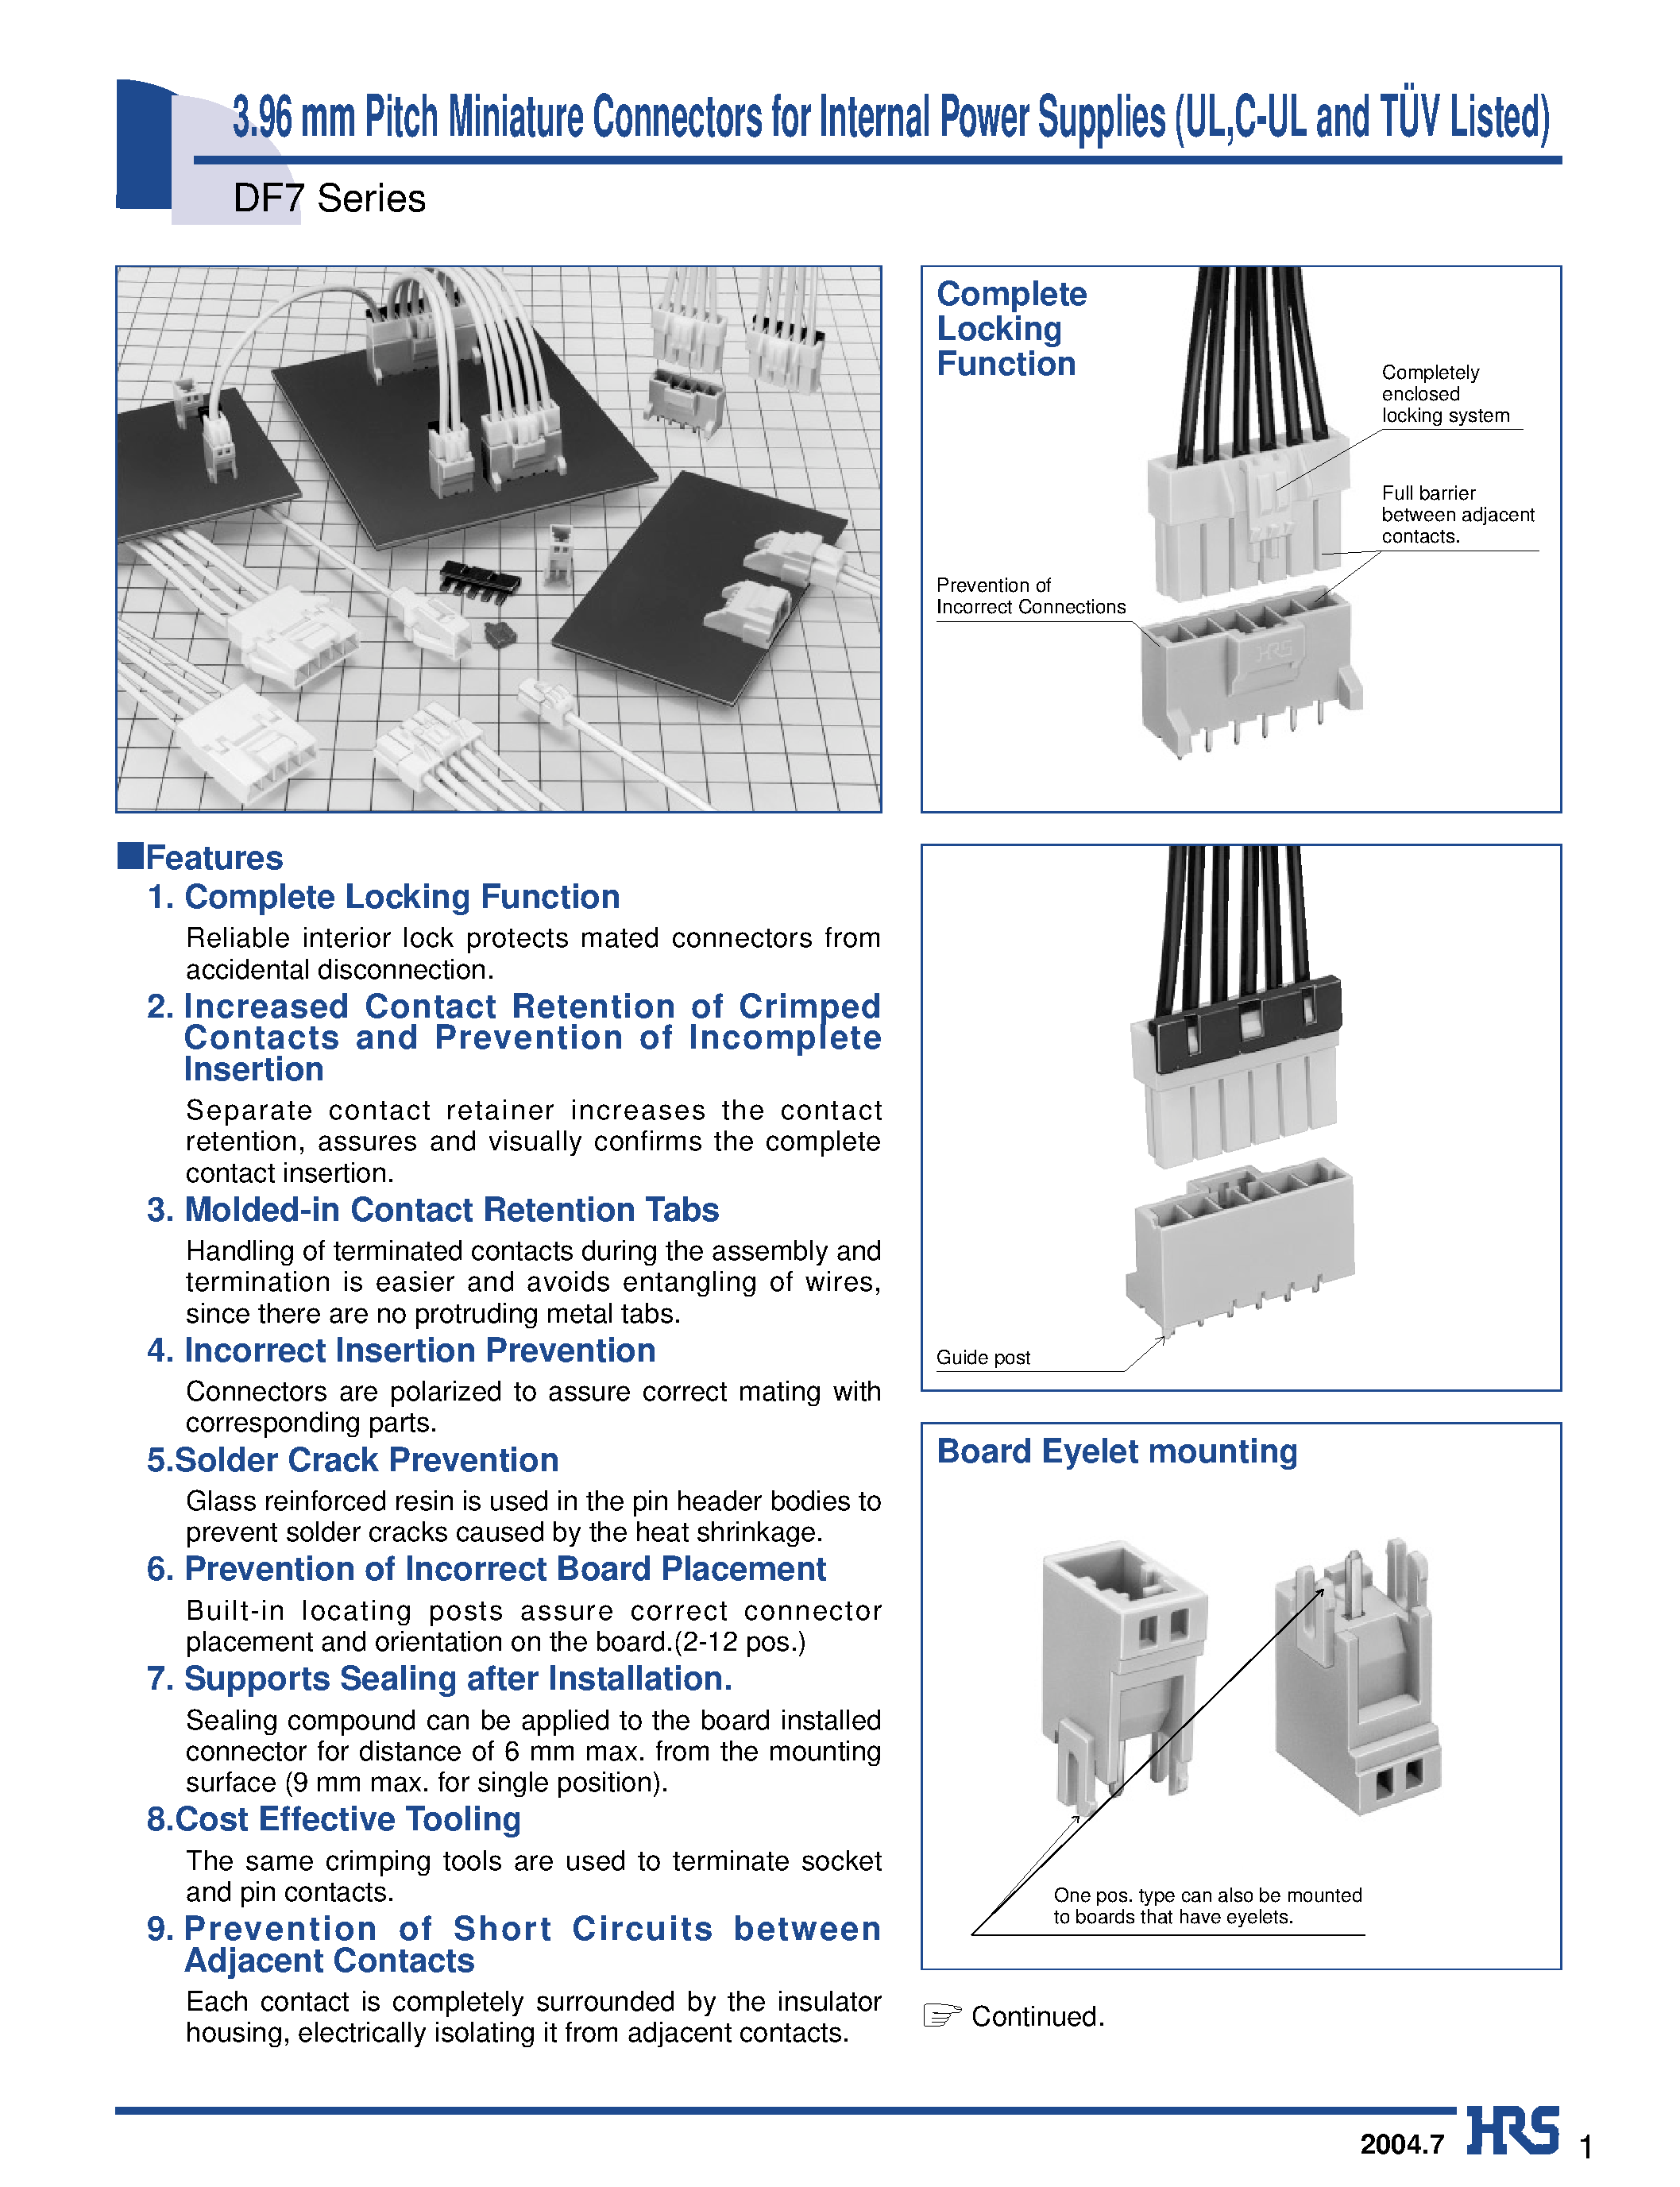 Datasheet DF7-3EP-3.96C - 3.96 mm Pitch Miniature Connectors for Internal Power Supplies (UL /C-UL and TUV Listed) page 1